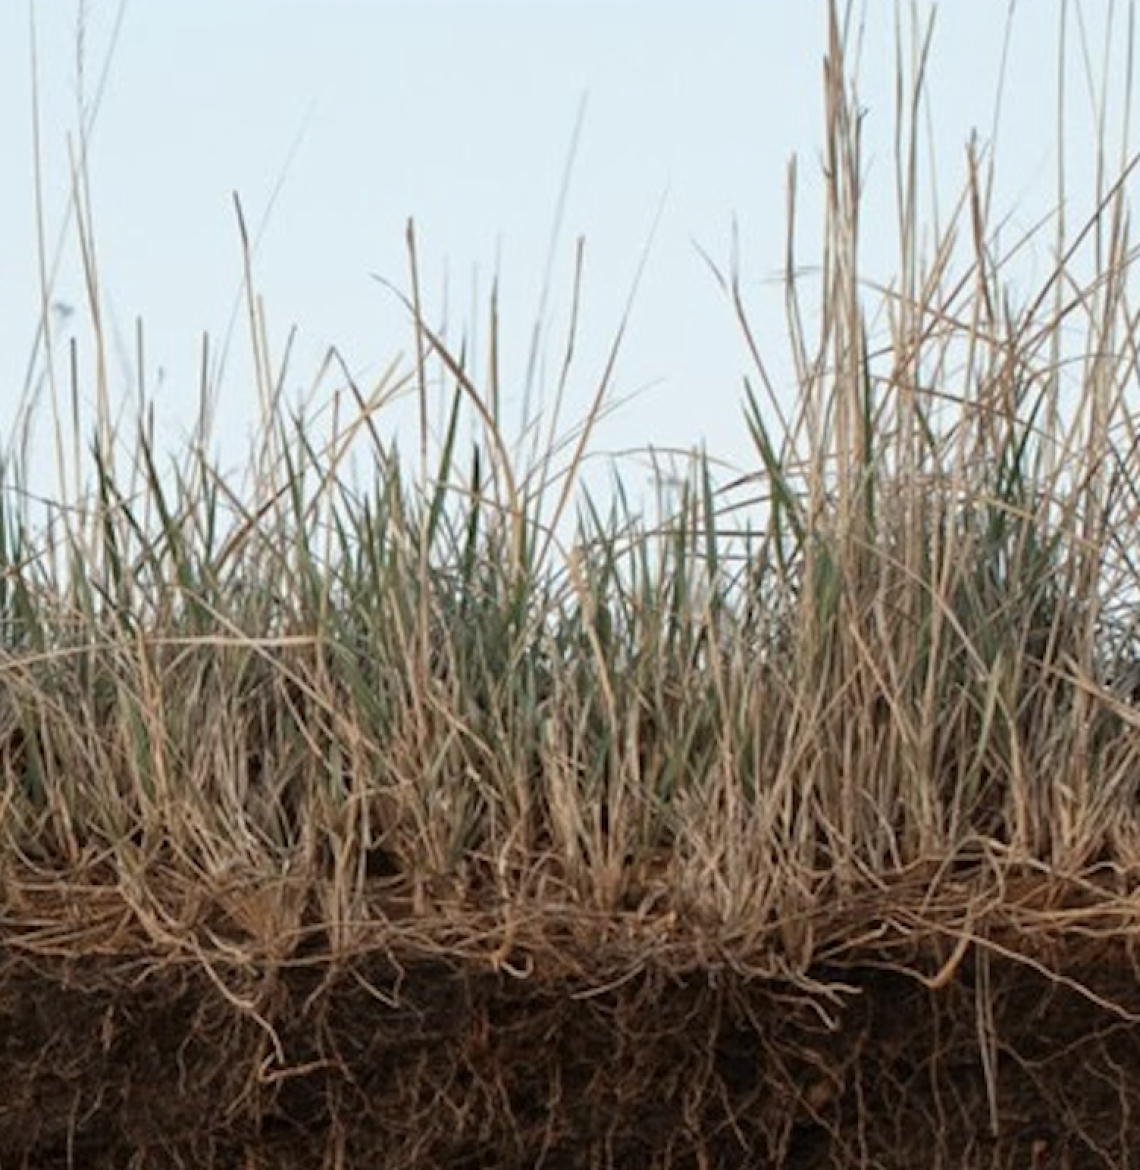 Dry grass is shown from roots to sky.